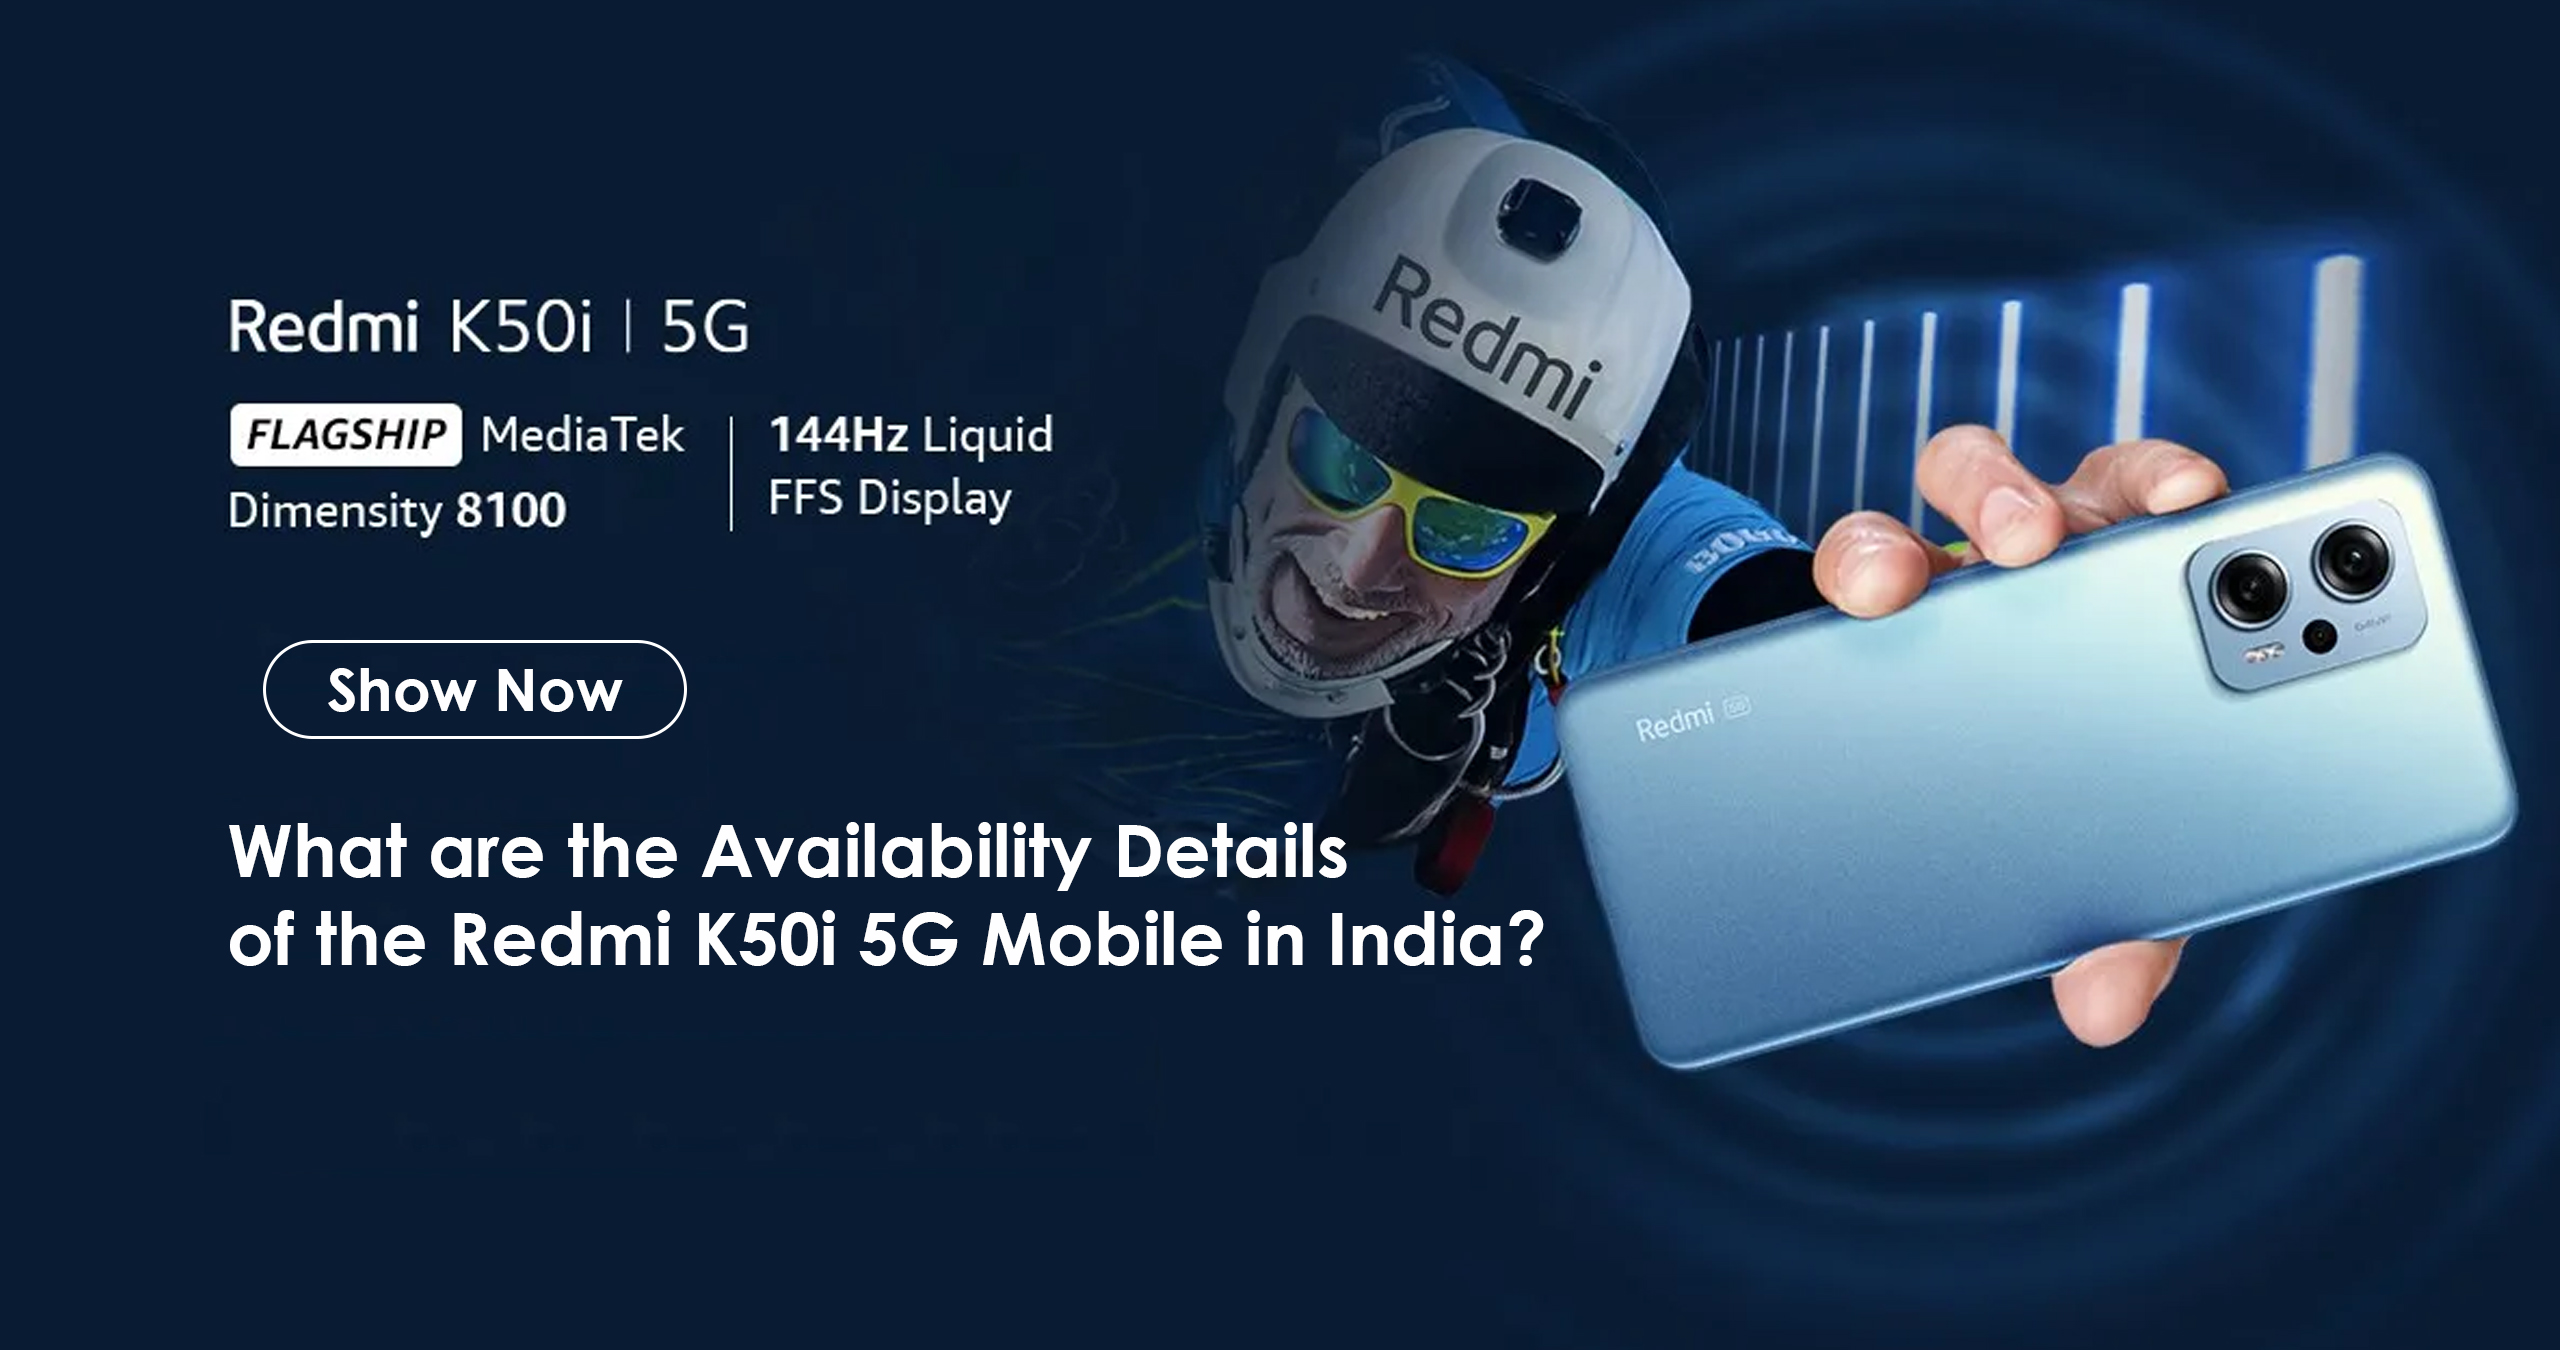 What are the availability details of the Redmi K50i 5G mobile in India?